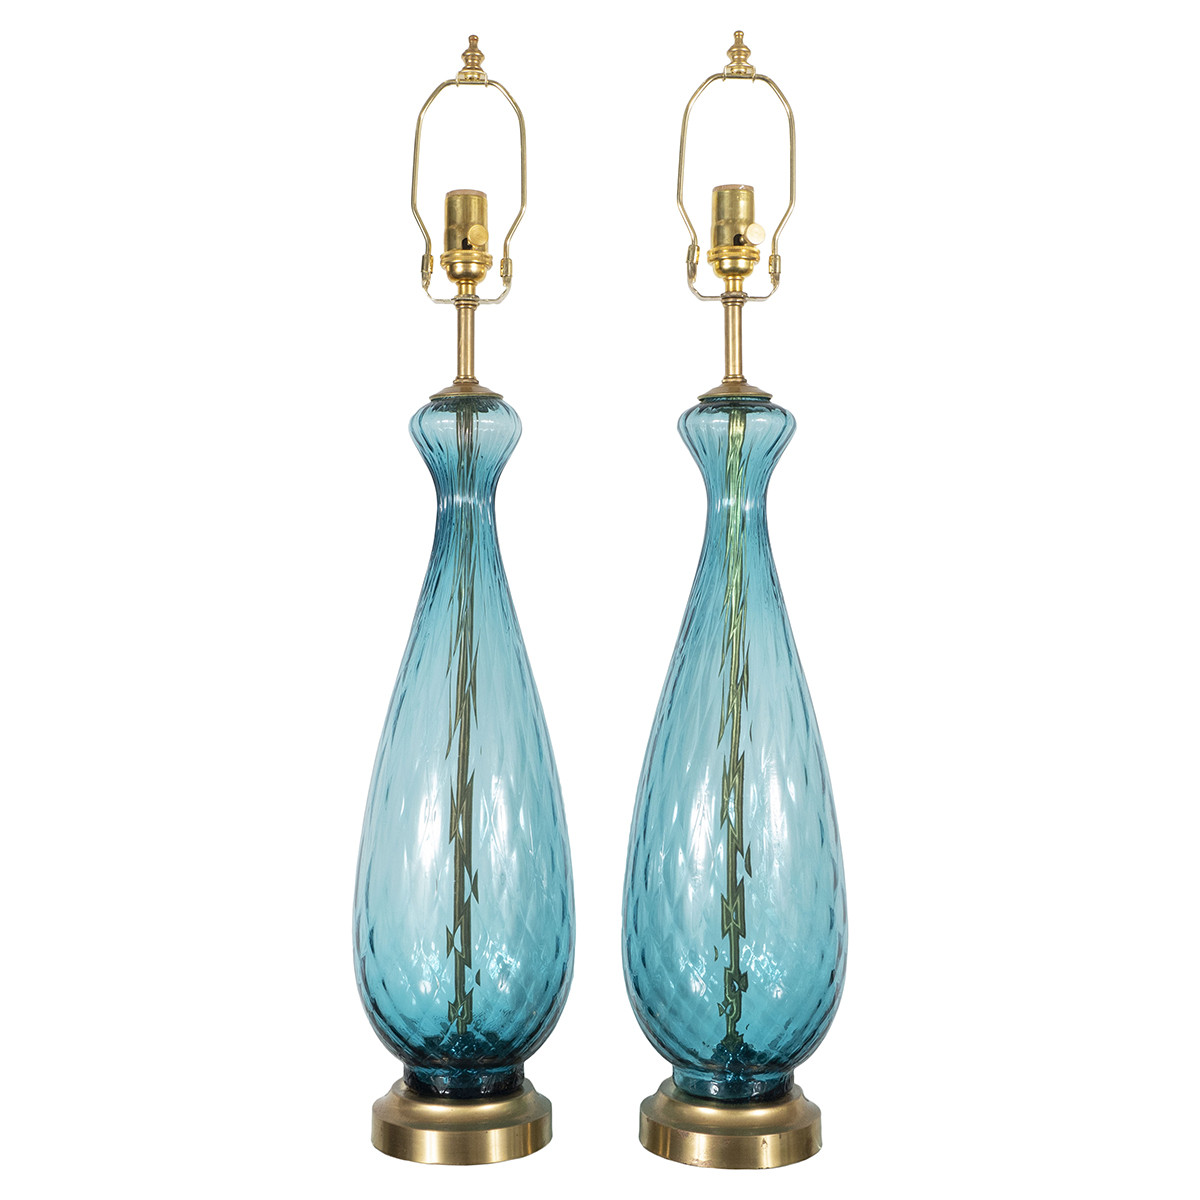 Pair of pale blue Murano glass lamps